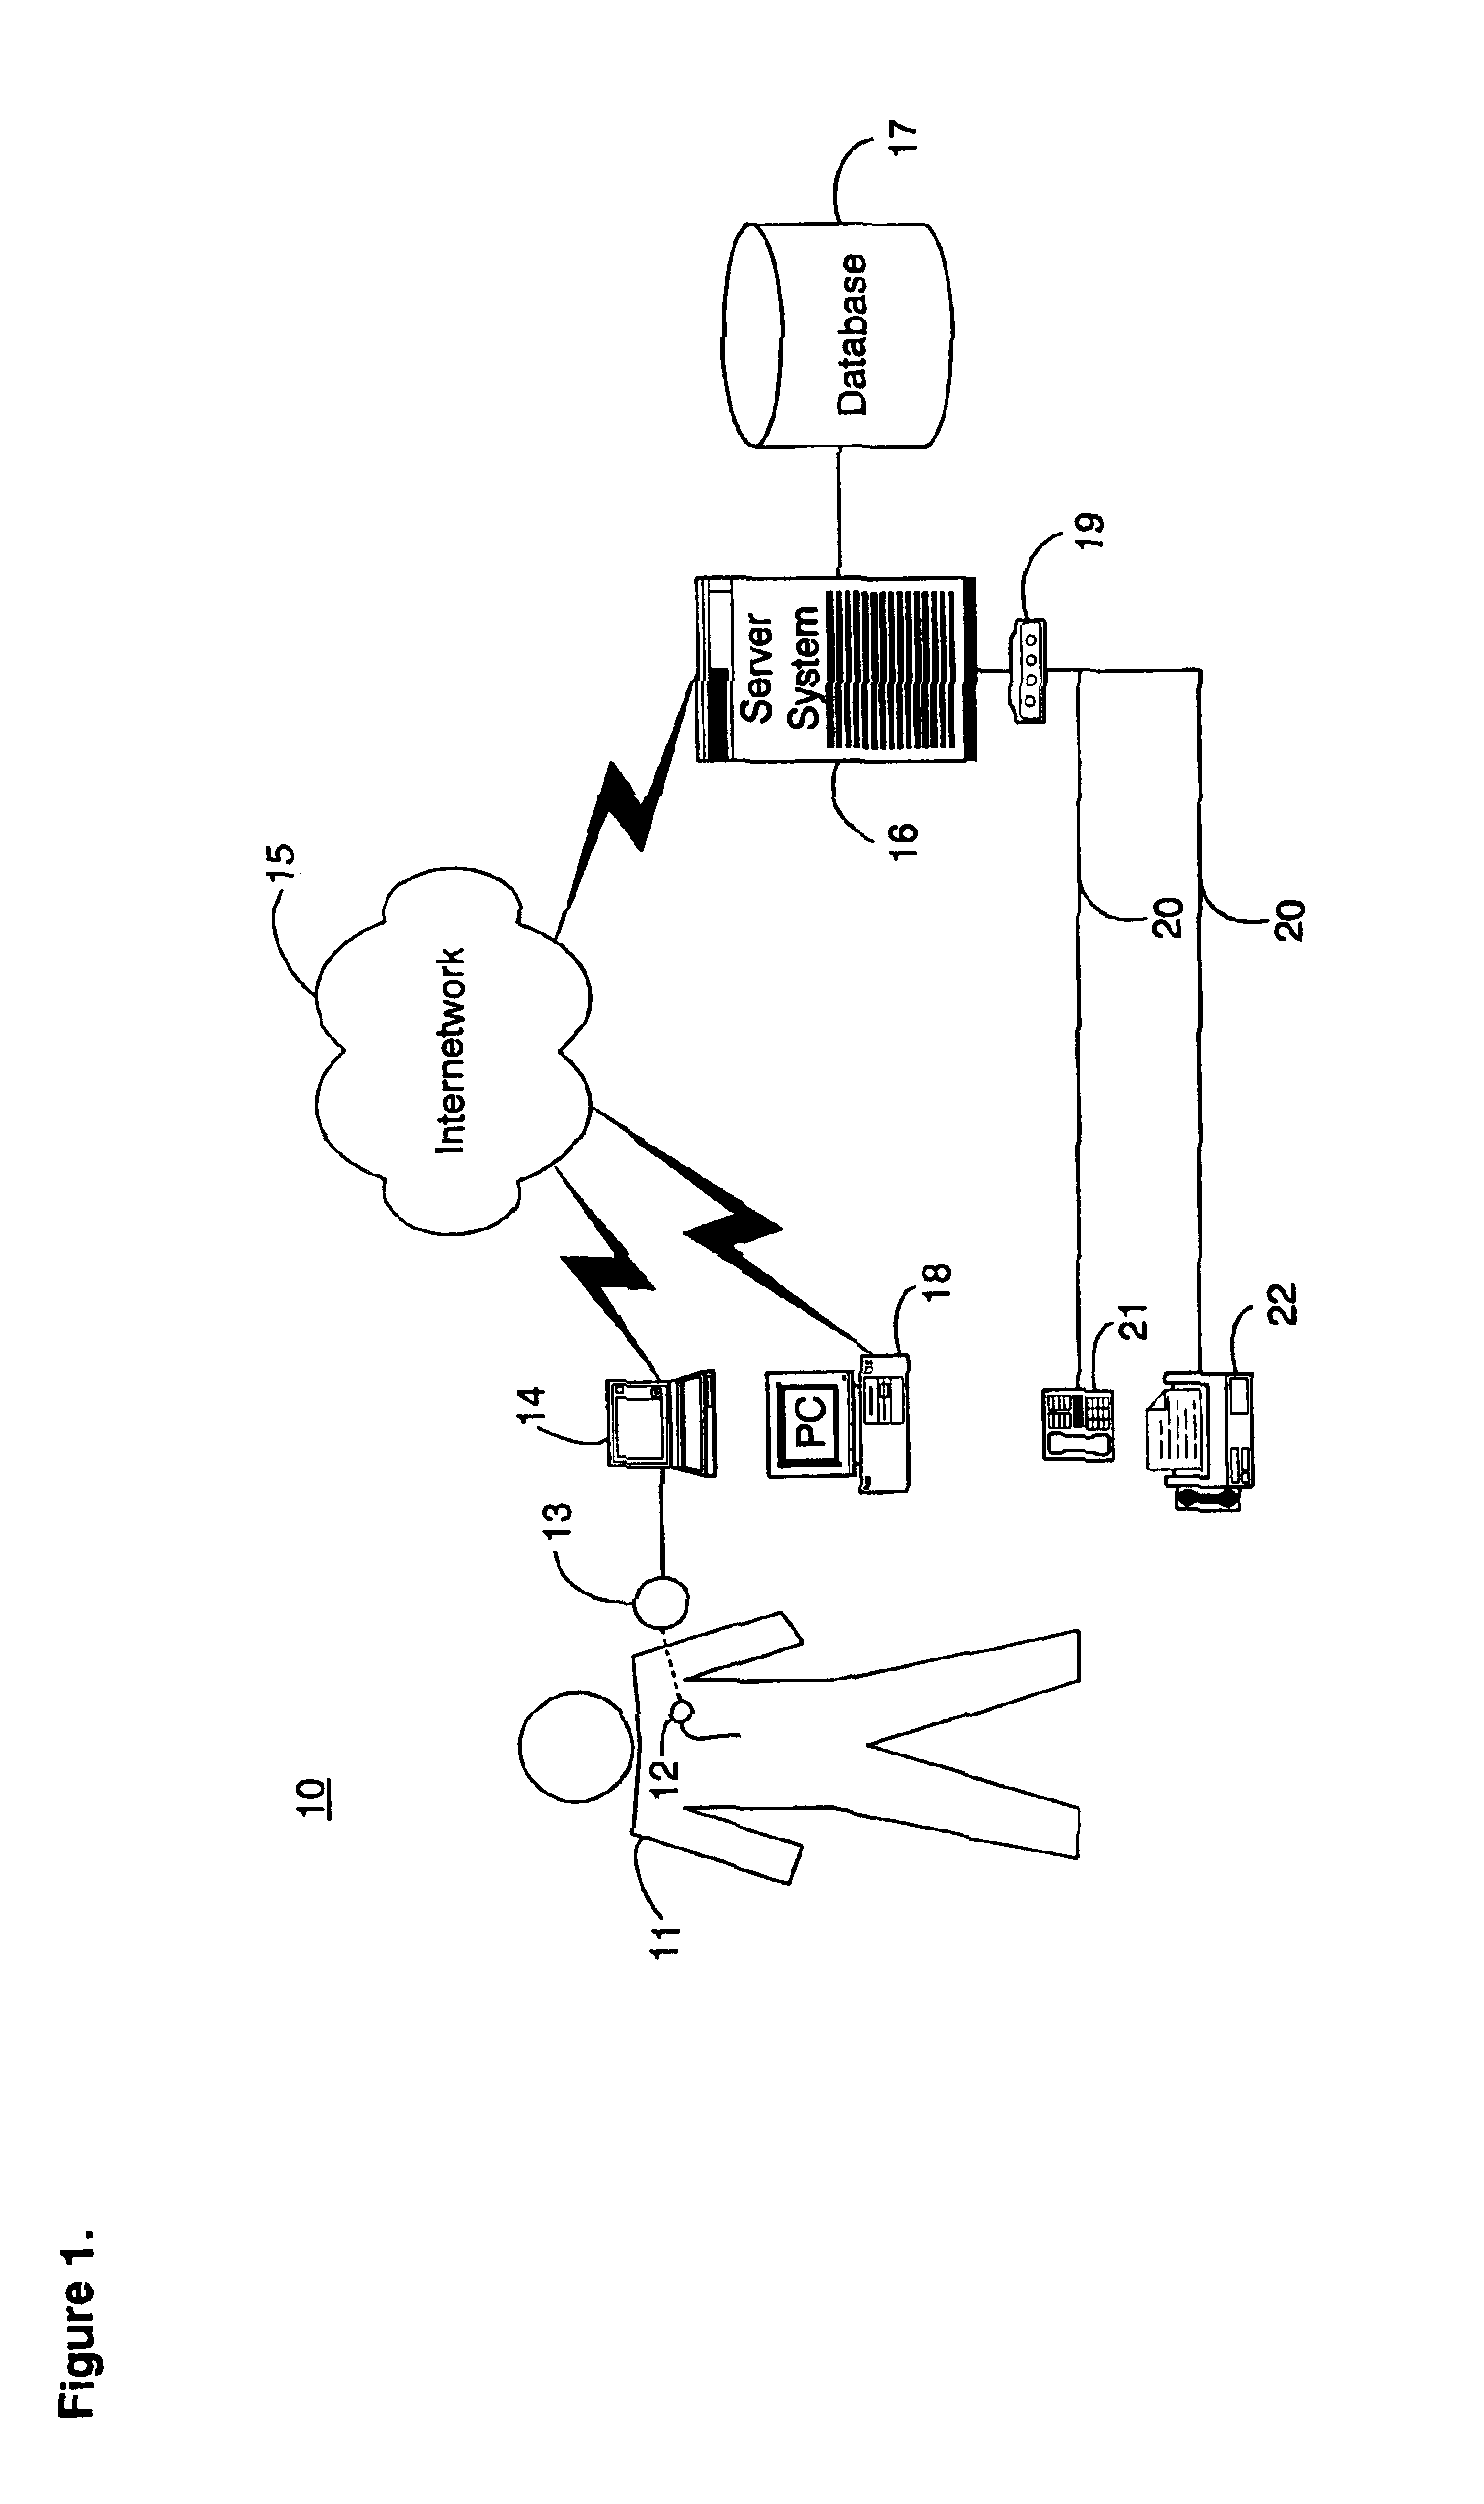 System and method for providing feedback to an individual patient for automated remote patient care